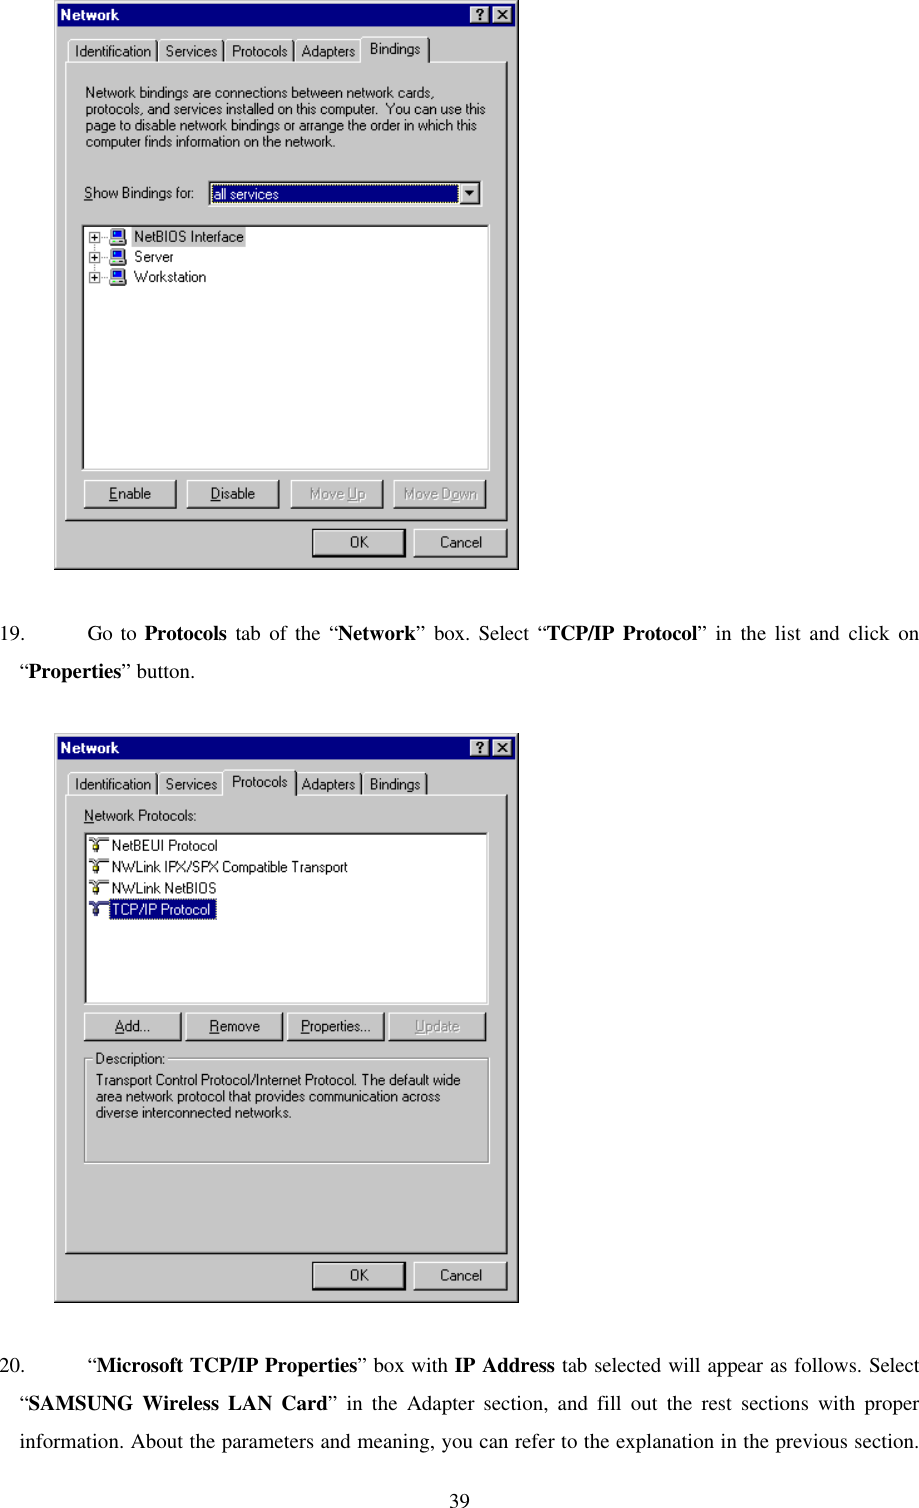 39          19. Go to Protocols tab of the “Network” box. Select “TCP/IP Protocol” in the list and click on“Properties” button.          20. “Microsoft TCP/IP Properties” box with IP Address tab selected will appear as follows. Select“SAMSUNG Wireless LAN Card” in the Adapter section, and fill out the rest sections with properinformation. About the parameters and meaning, you can refer to the explanation in the previous section.